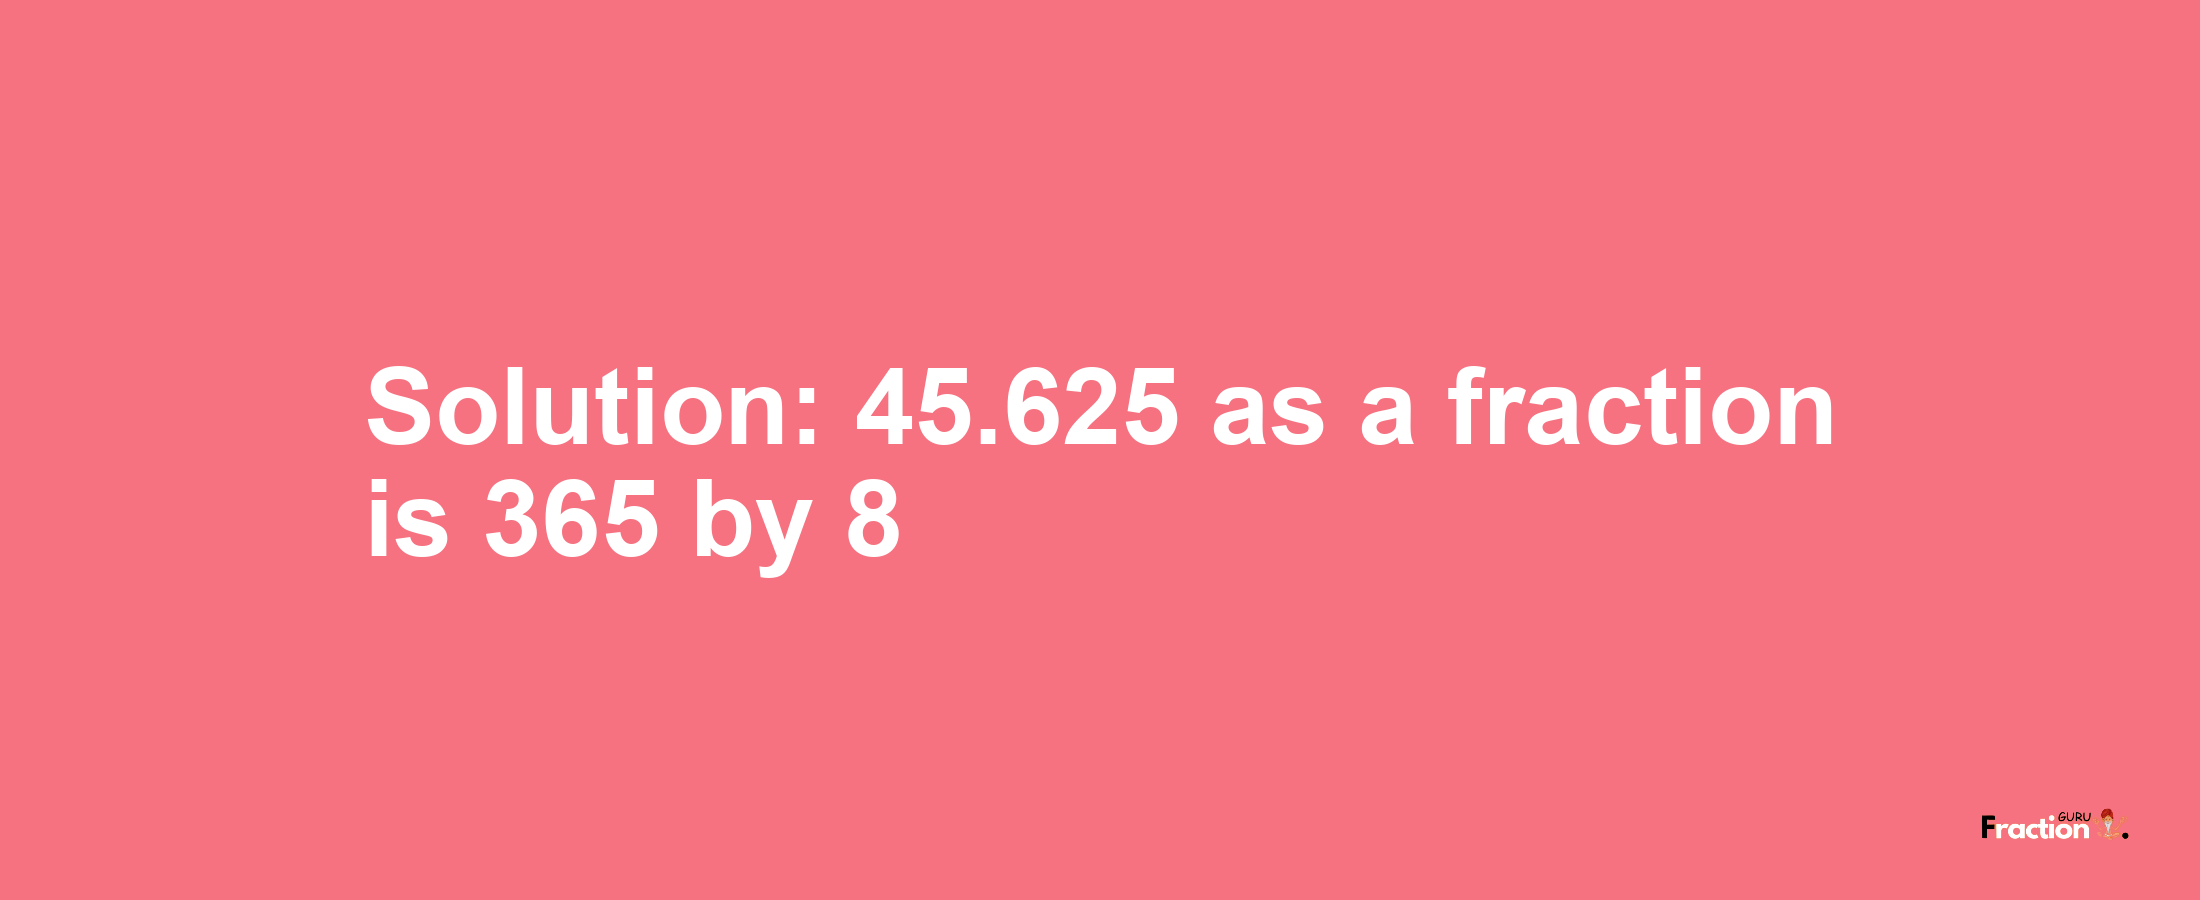 Solution:45.625 as a fraction is 365/8